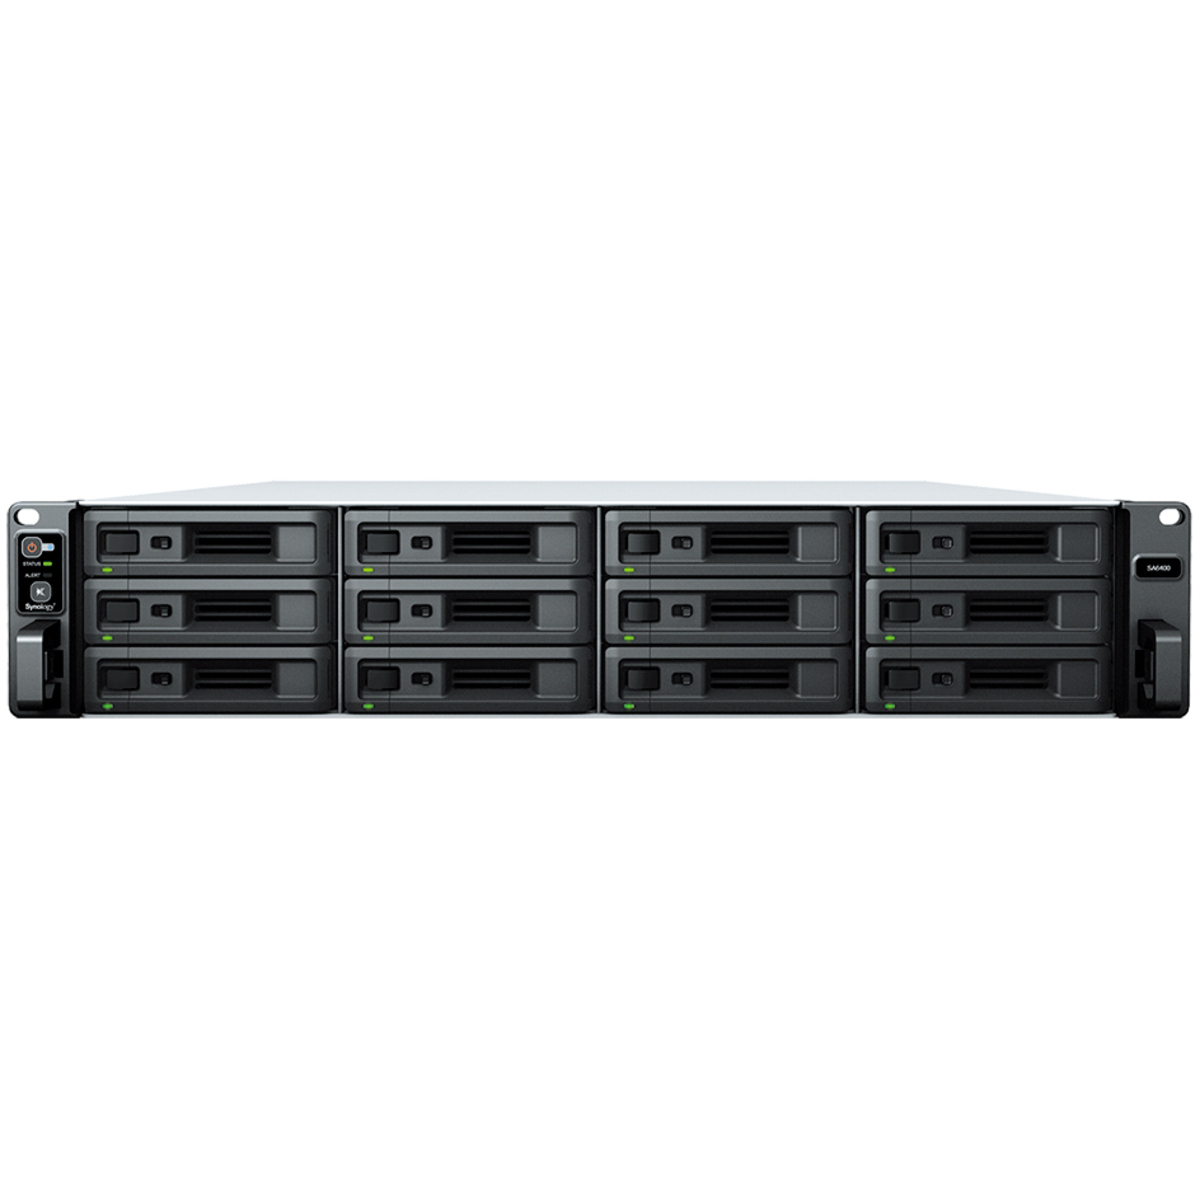 Synology RackStation SA6400 264tb 12-Bay RackMount Large Business / Enterprise NAS - Network Attached Storage Device 12x22tb Western Digital Ultrastar HC580 WUH722422ALE6L4 3.5 7200rpm SATA 6Gb/s HDD ENTERPRISE Class Drives Installed - Burn-In Tested RackStation SA6400